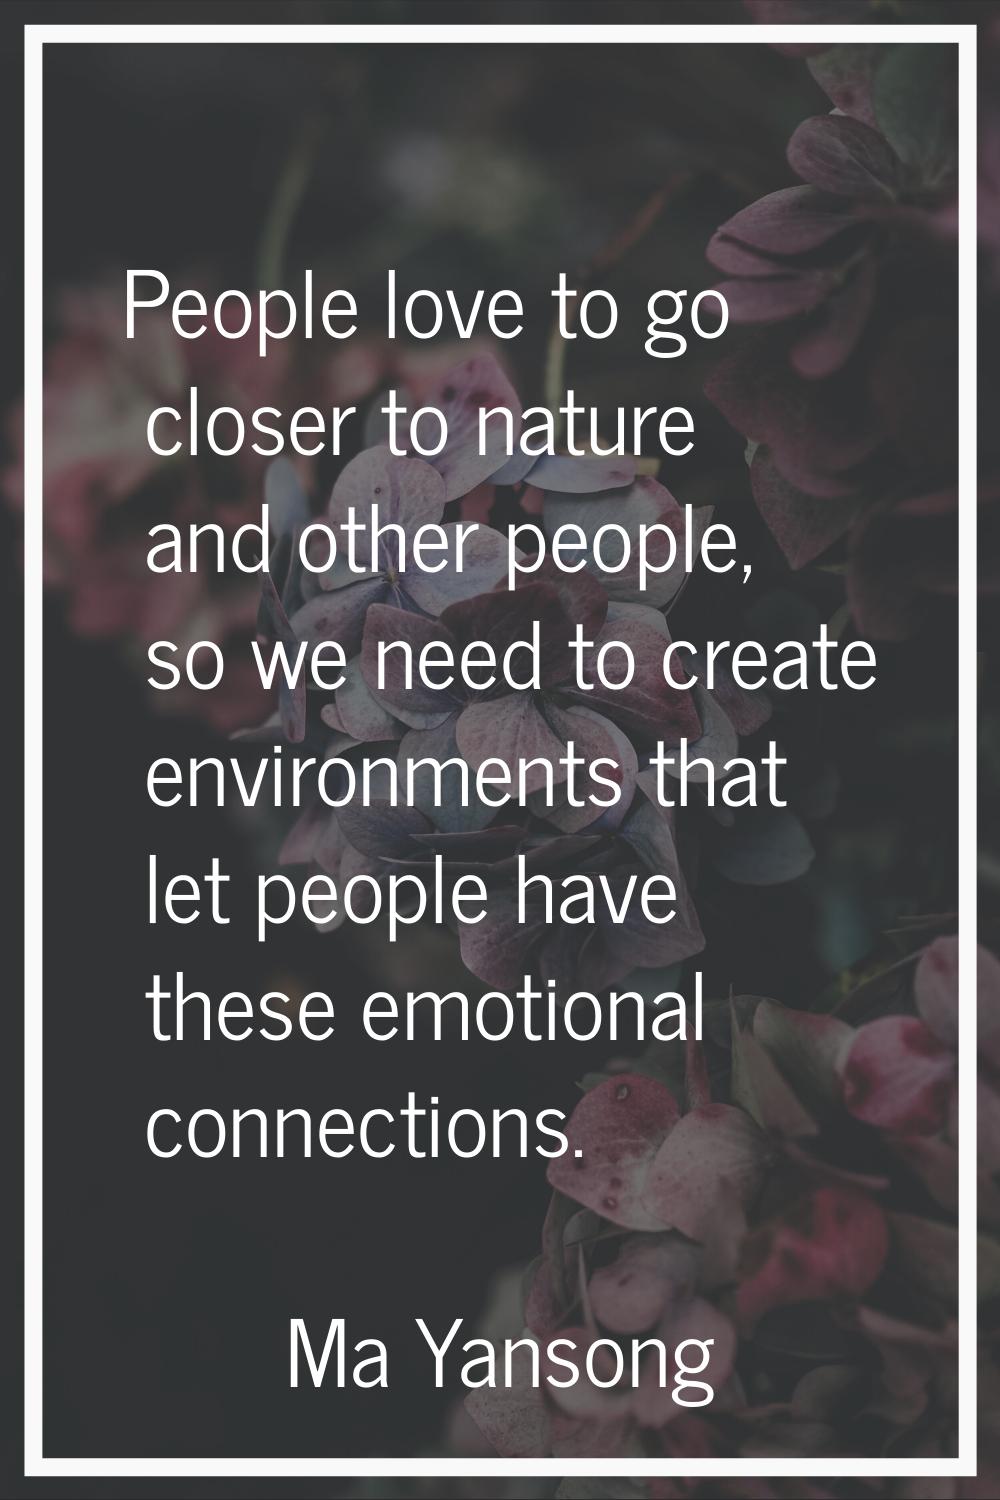 People love to go closer to nature and other people, so we need to create environments that let peo